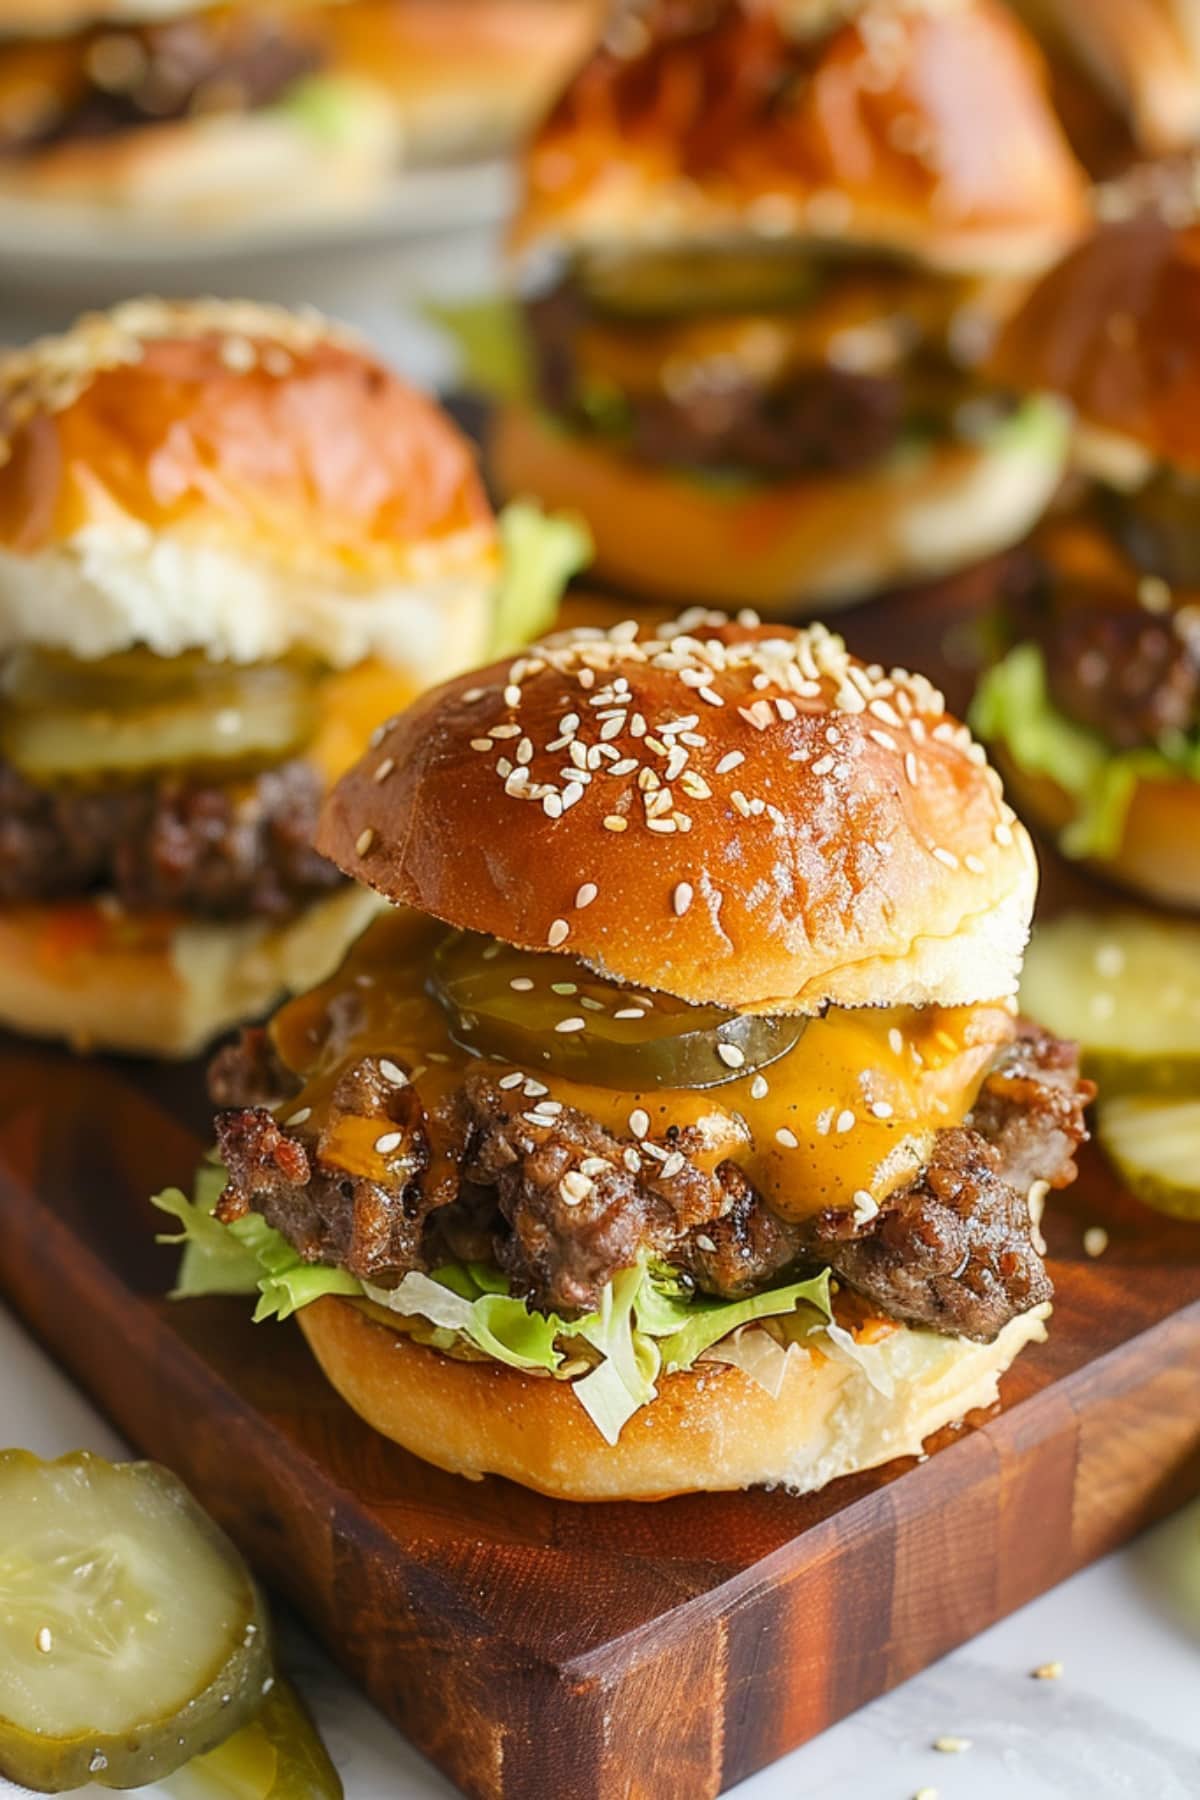 Juicy and meaty homemade big mac sliders on a wooden board